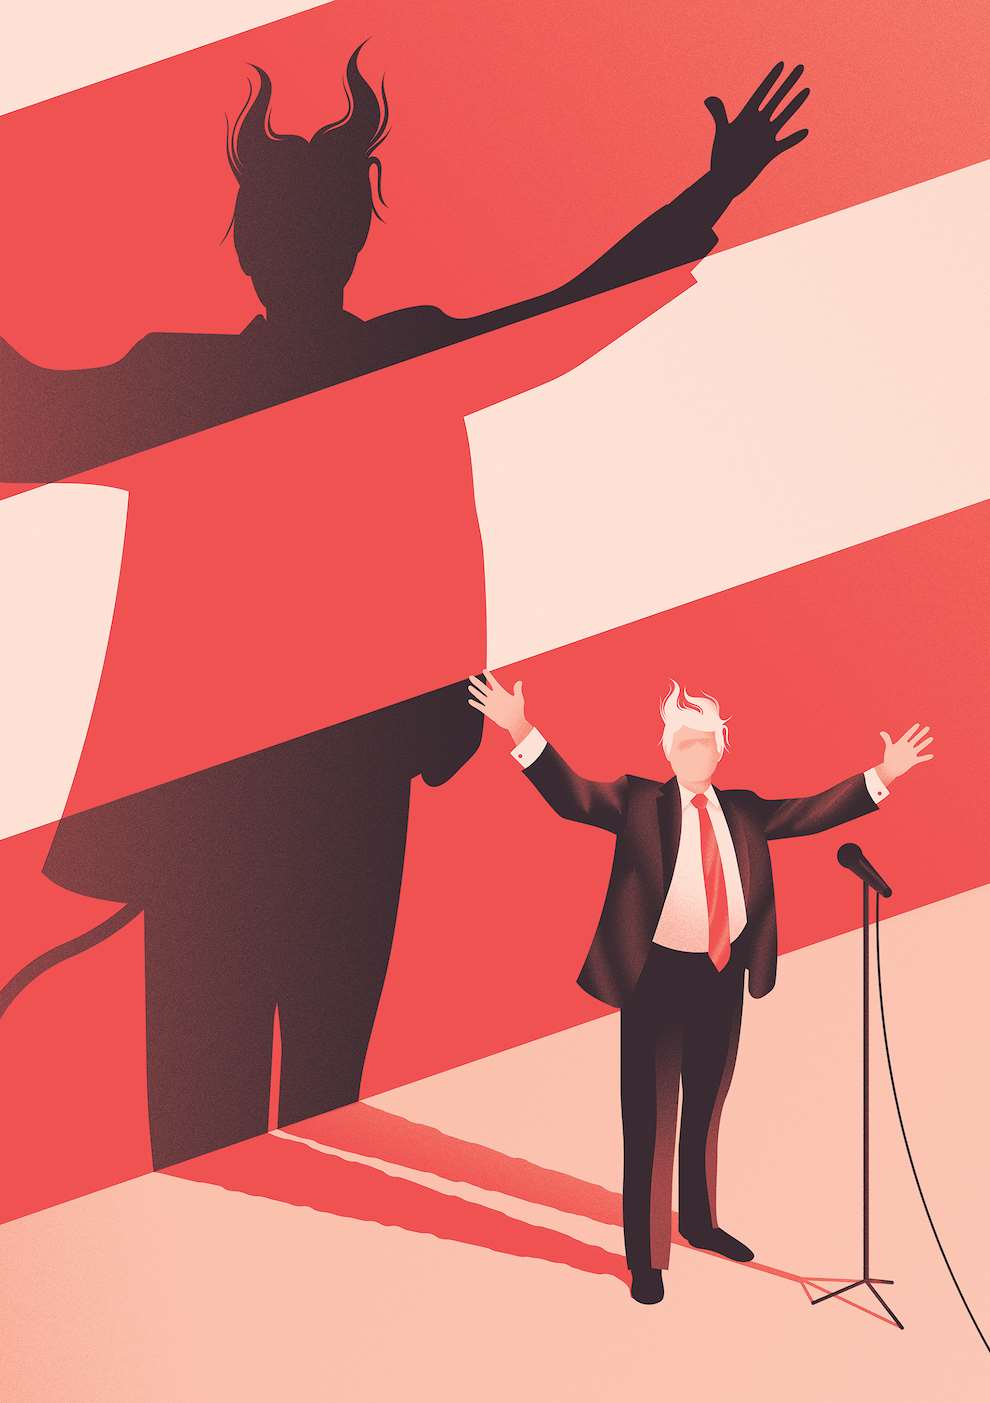 Jack Daly, Digital illustration of Trump, with shadow portraying him as the devil. 